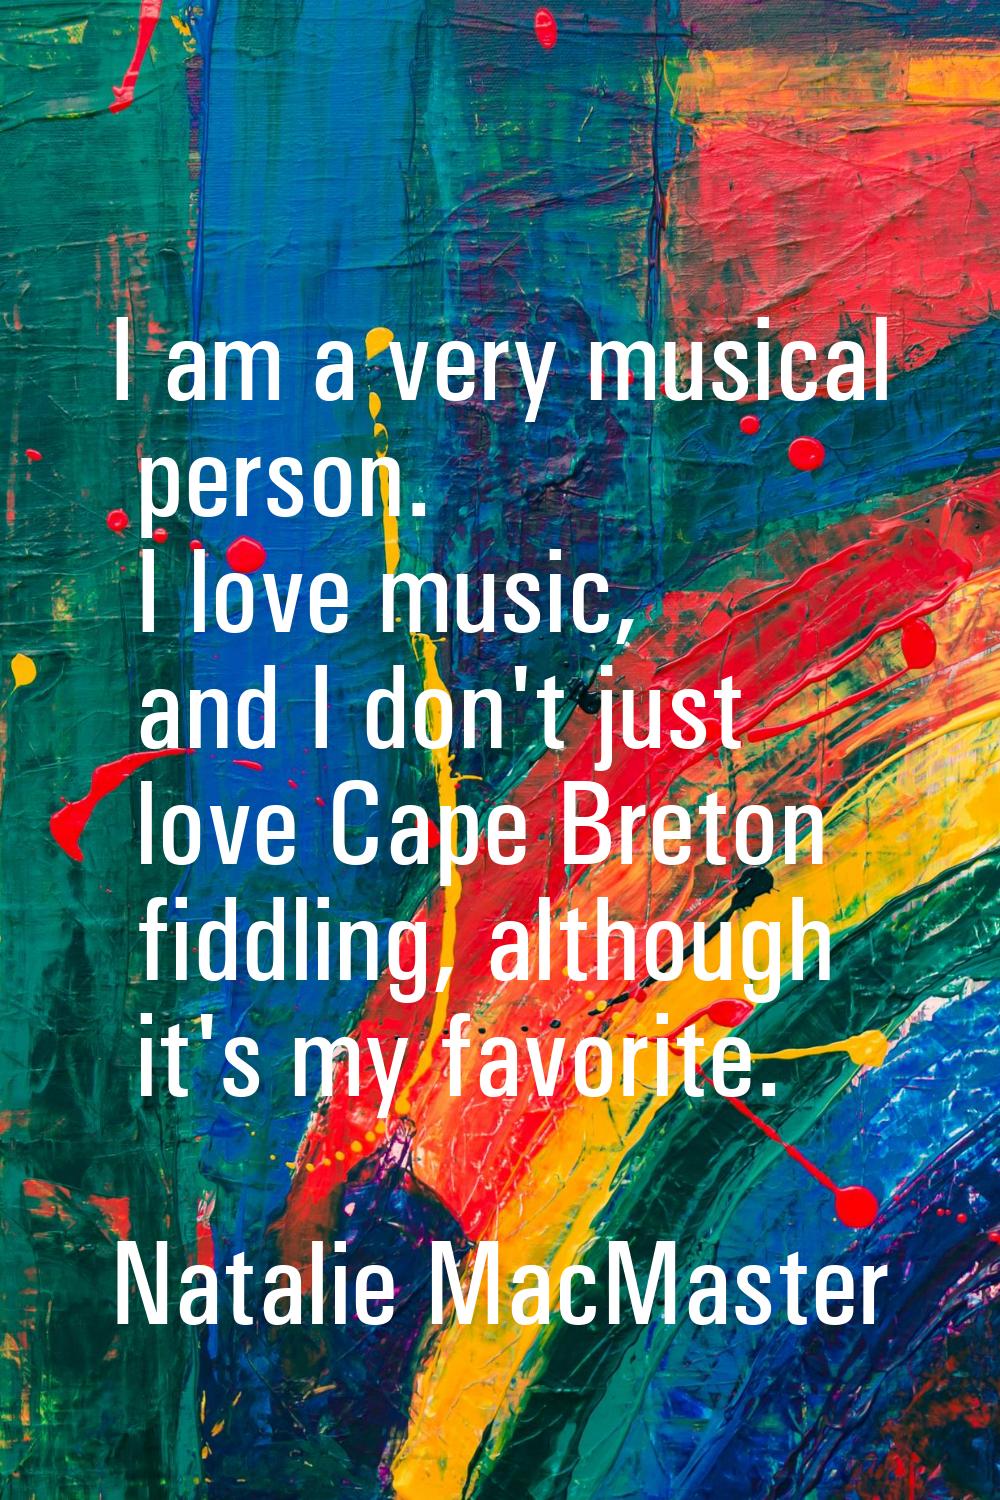 I am a very musical person. I love music, and I don't just love Cape Breton fiddling, although it's